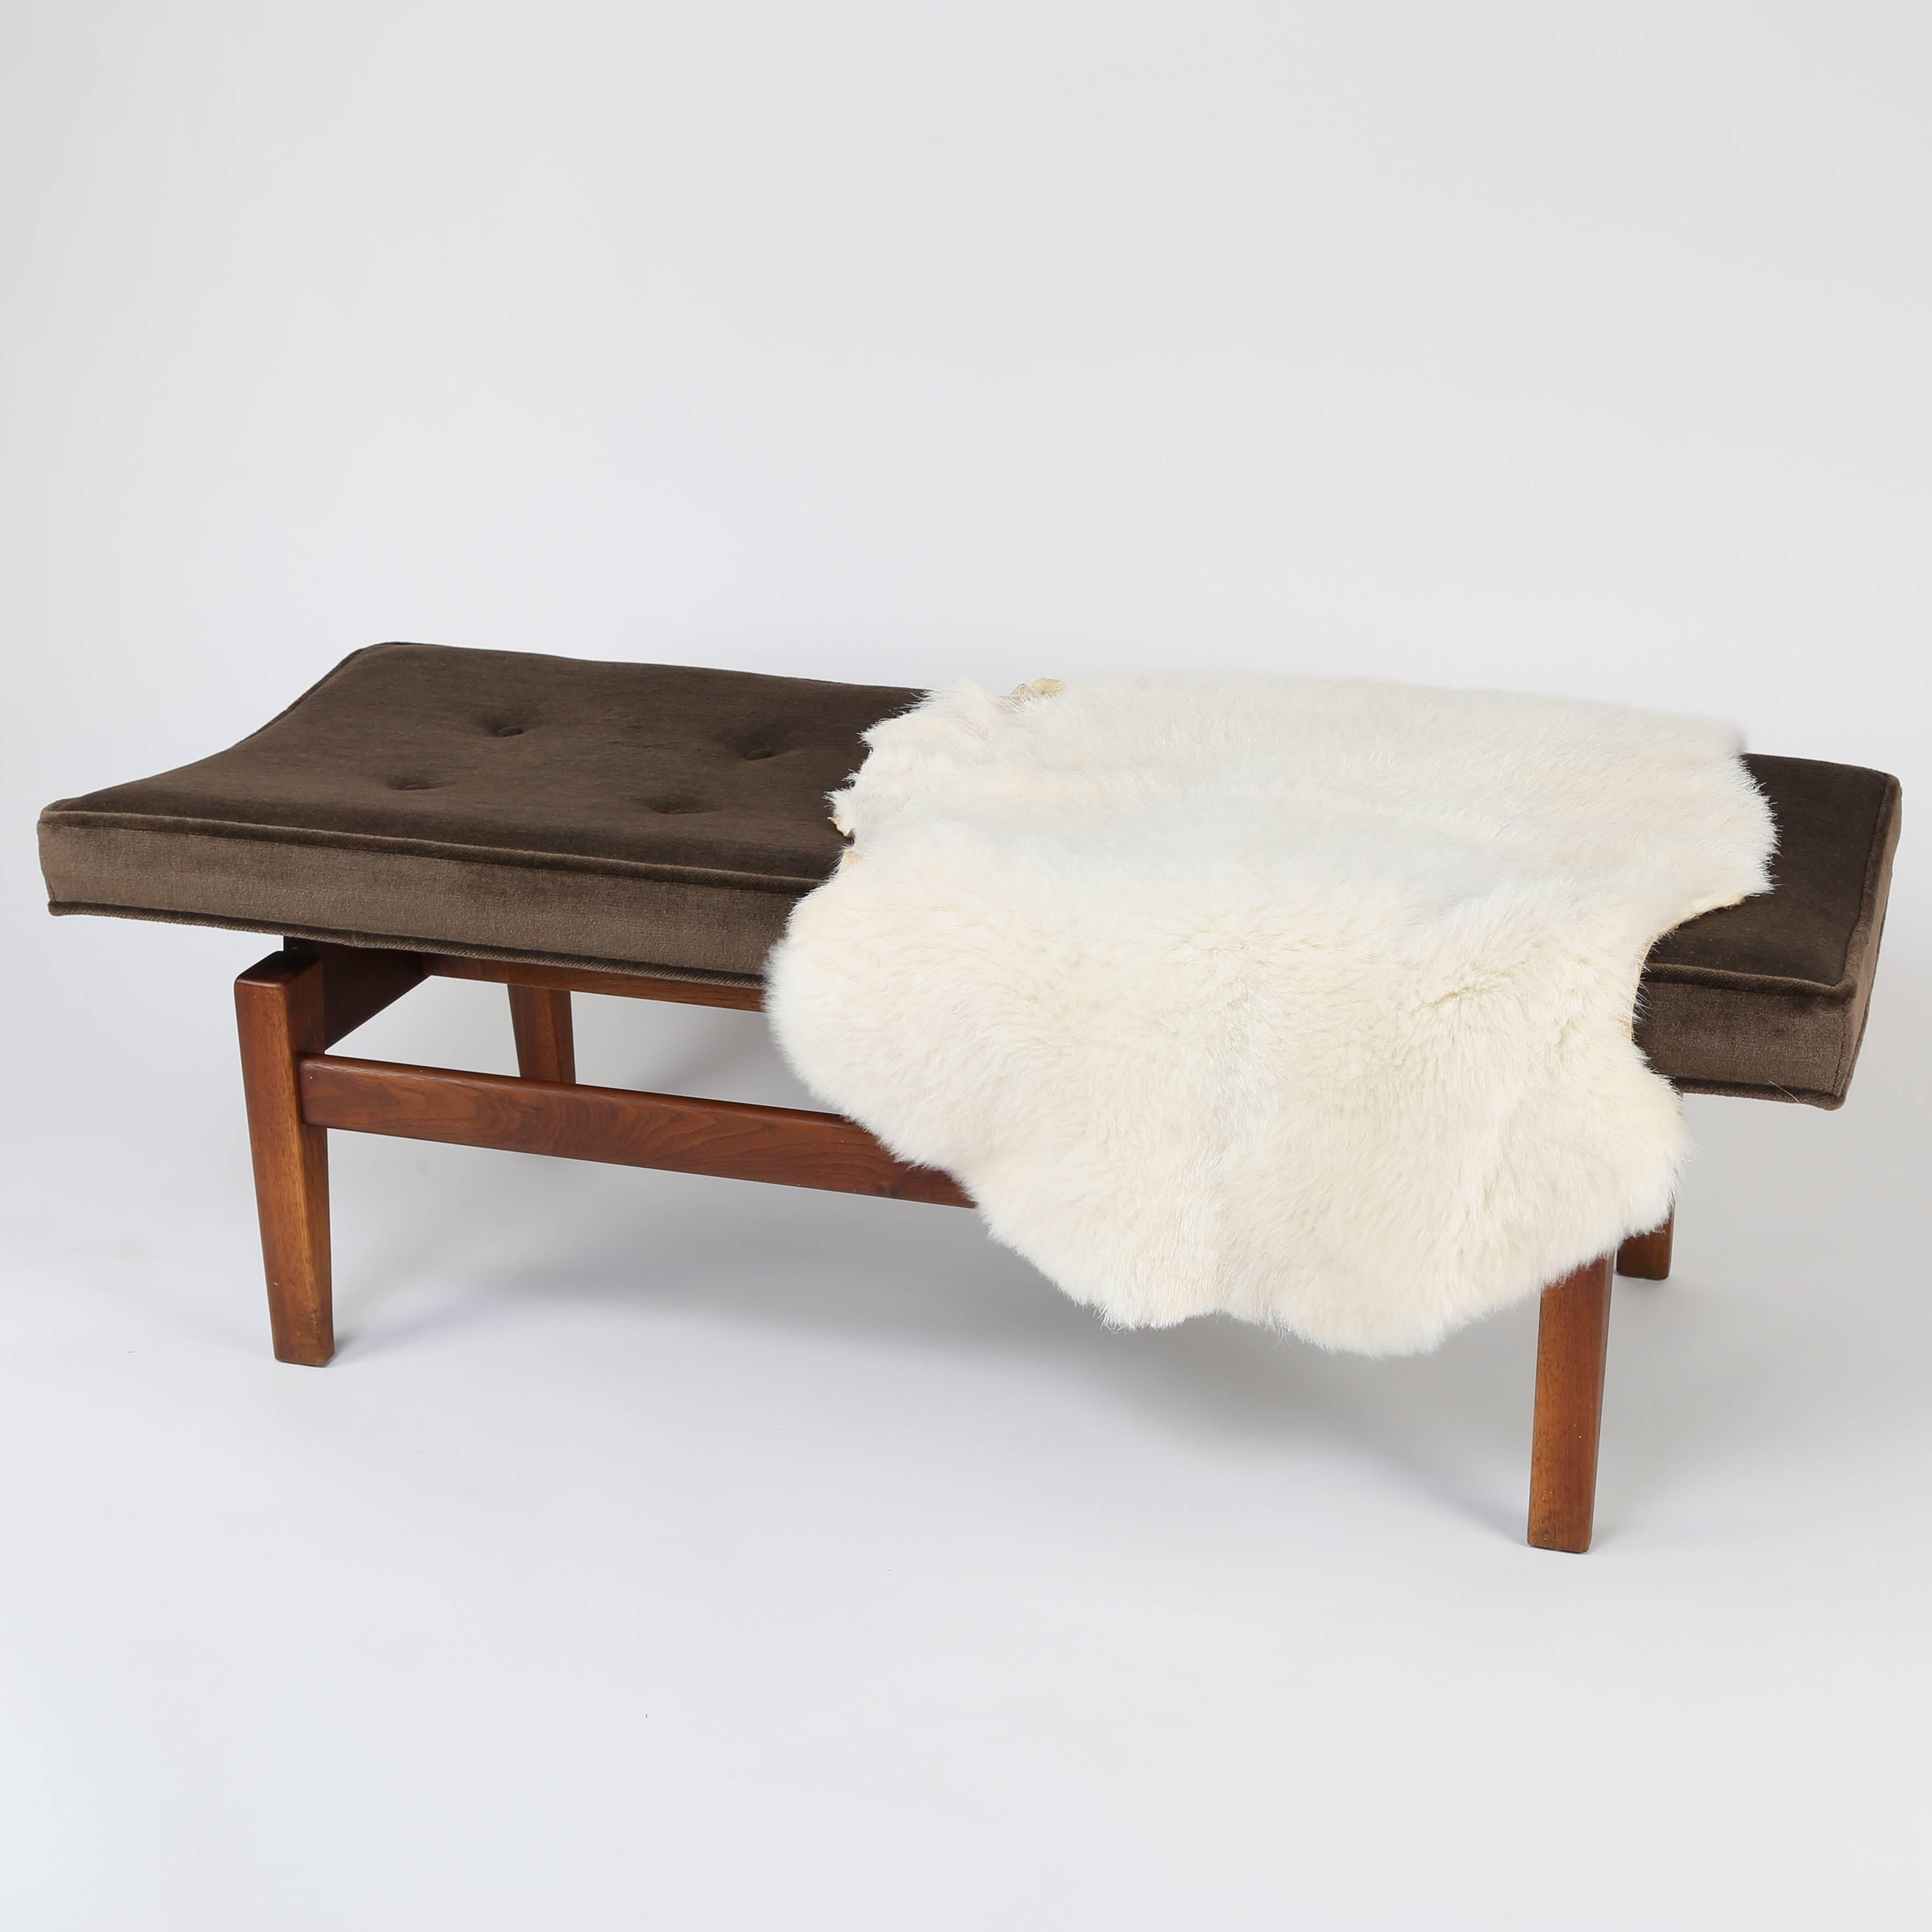 Gorgeous off-white pelt of a pasture-grazed sheep from the pristine Catskill Mountains of New York. This luxurious throw or occasional rug comes from a Katahdin Hair Sheep, whose coat consists of soft hair. As the weather progresses from spring to